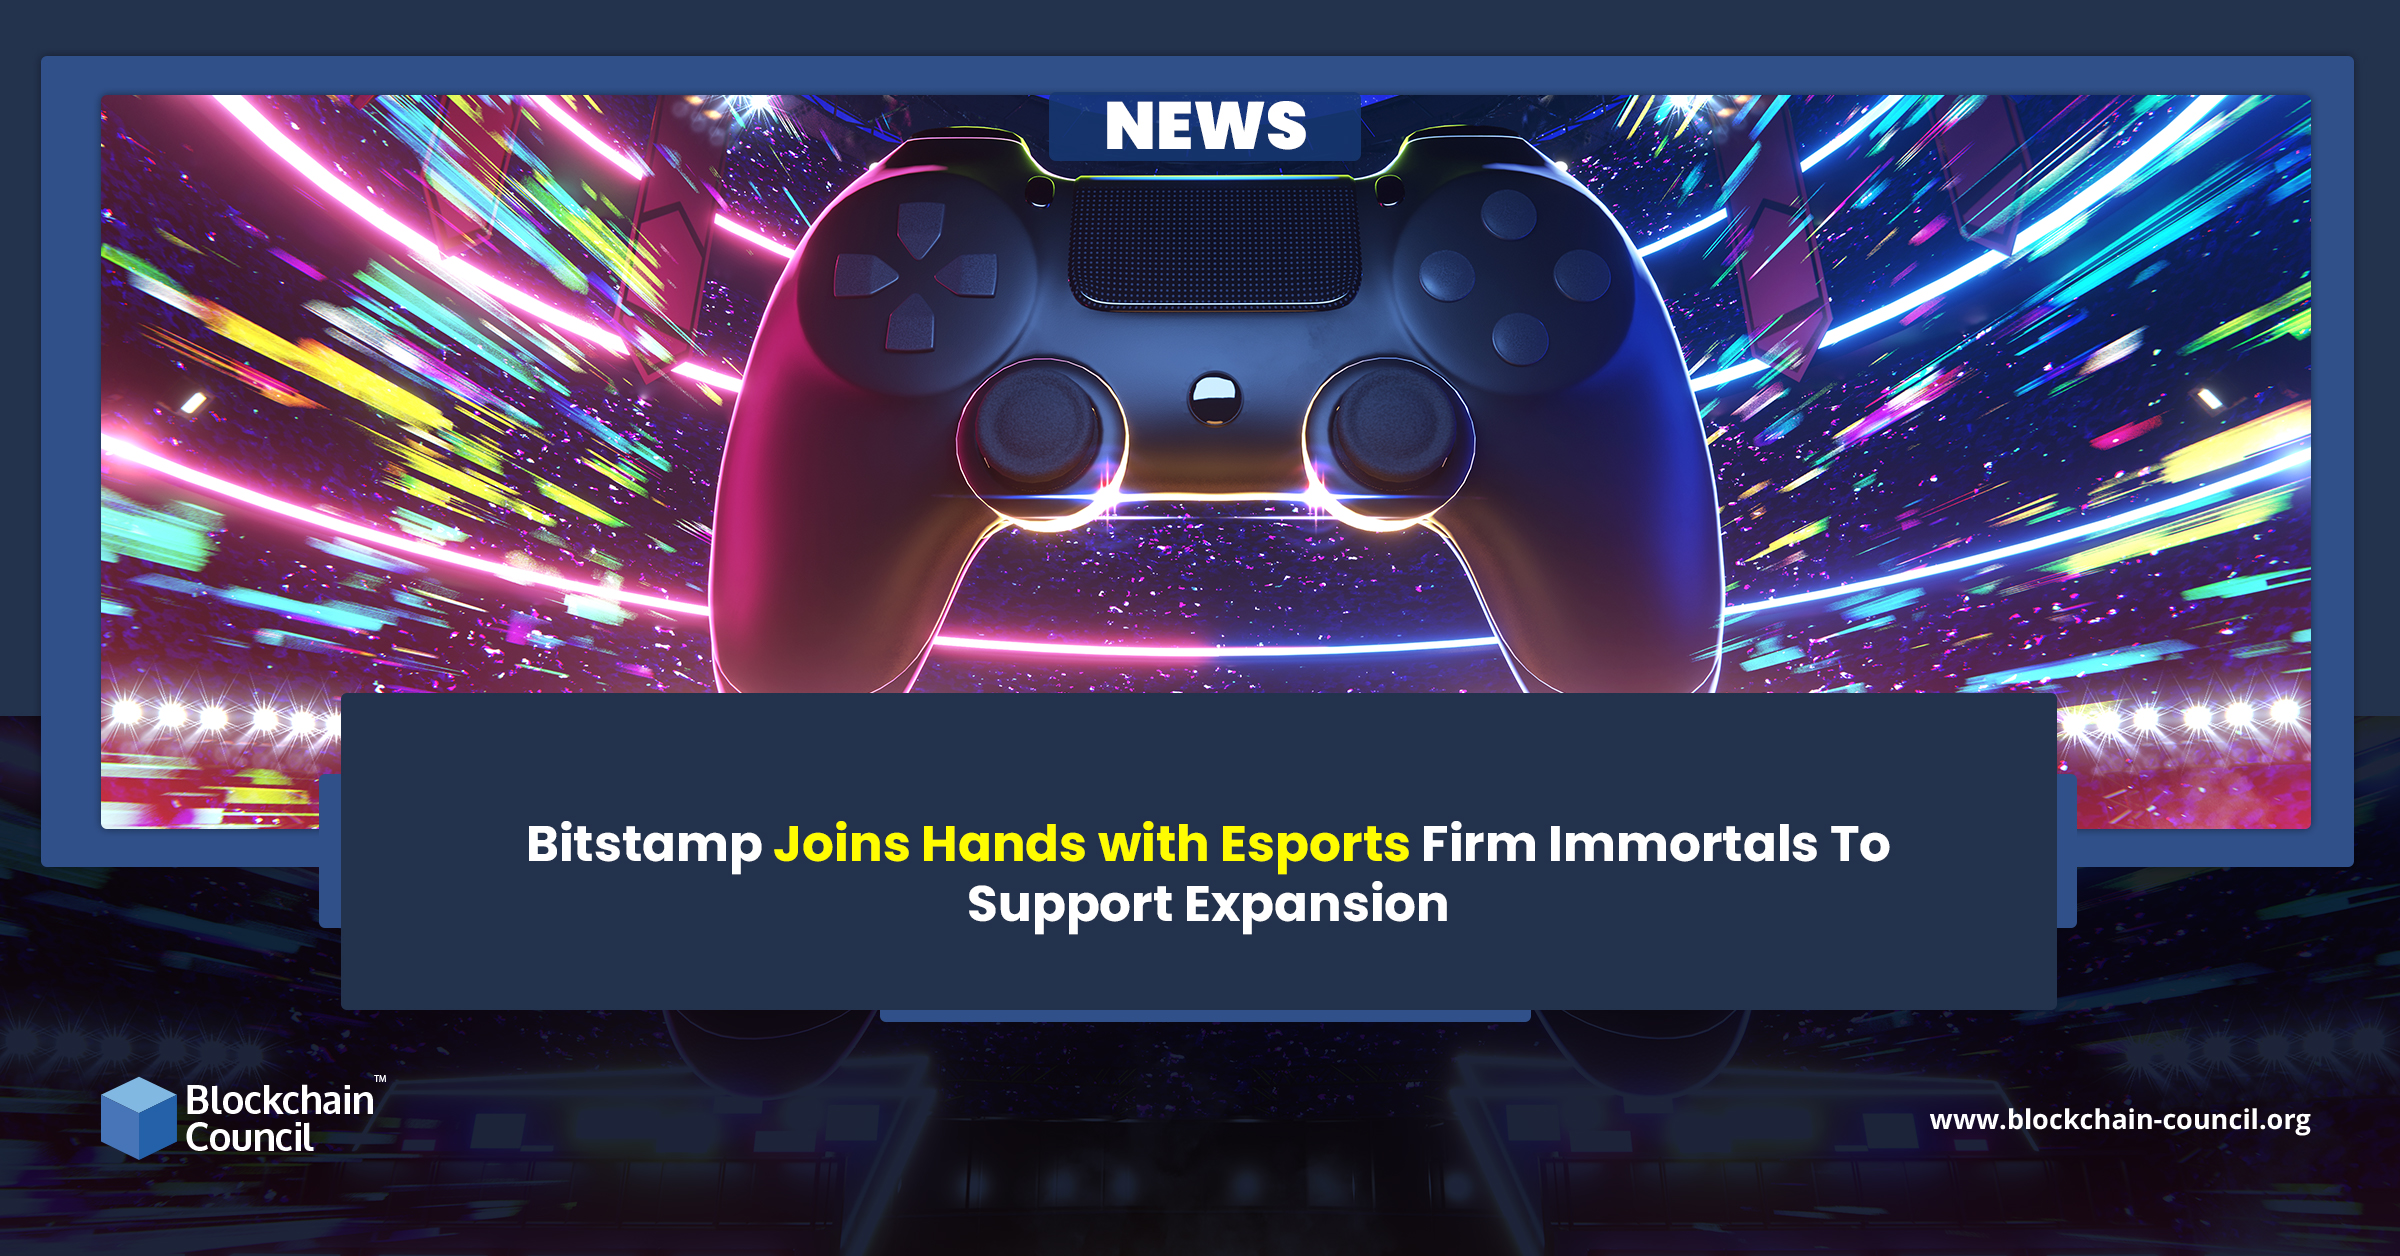 Bitstamp Joins Hands with Esports Firm Immortals To Support Expansion news emailer